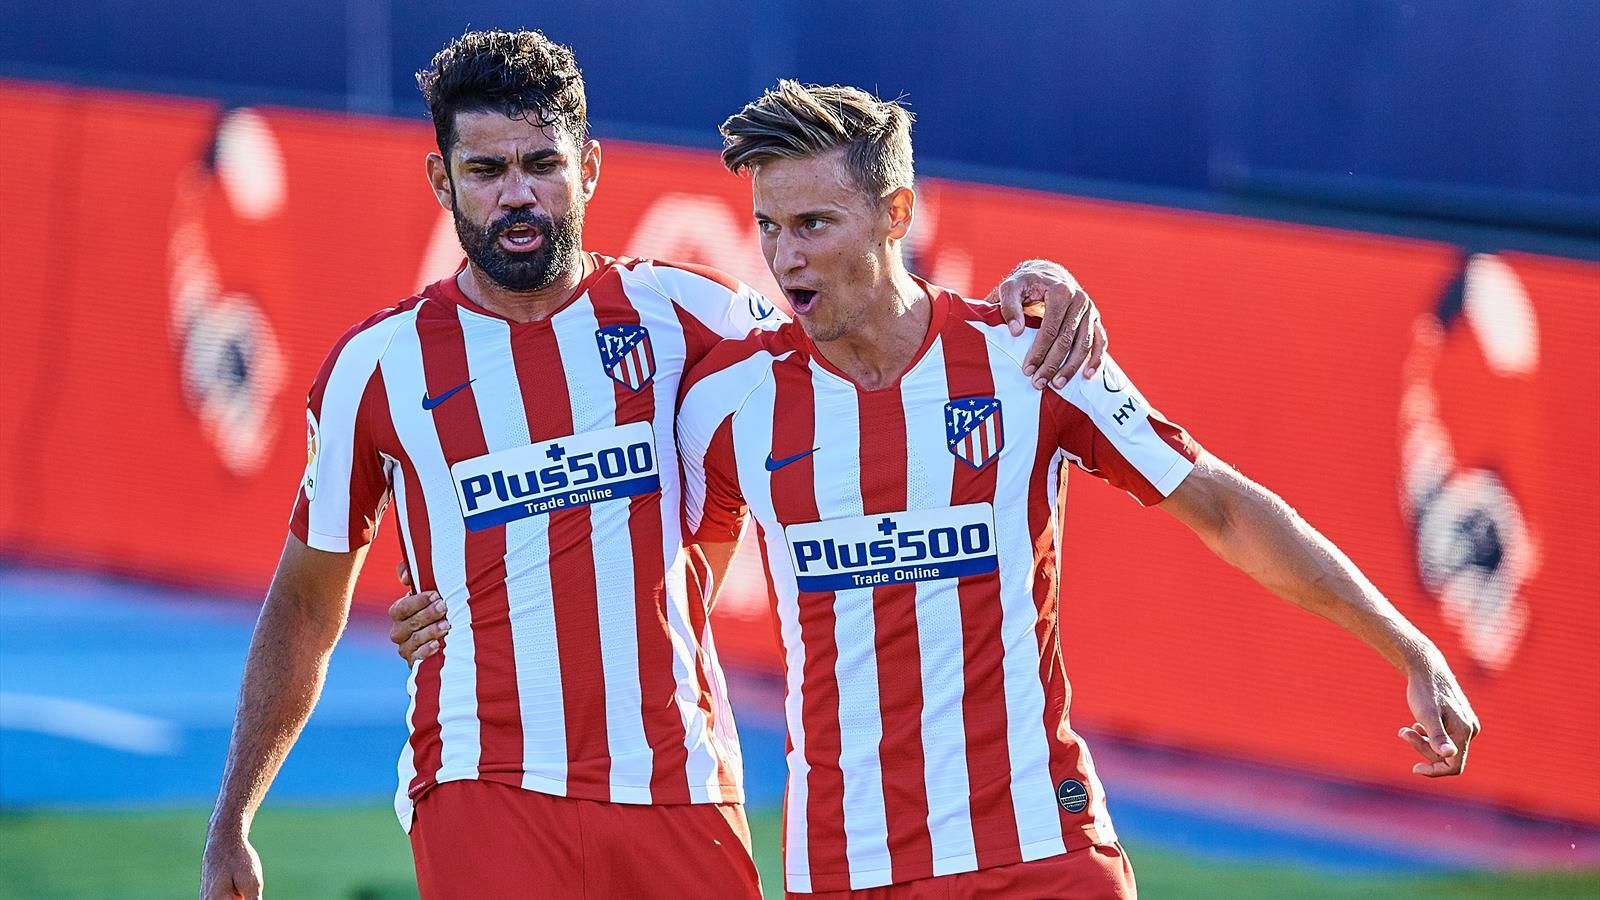 Atletico Madrid Crosses Sevilla to Third Place in La Liga after Defeating Levante